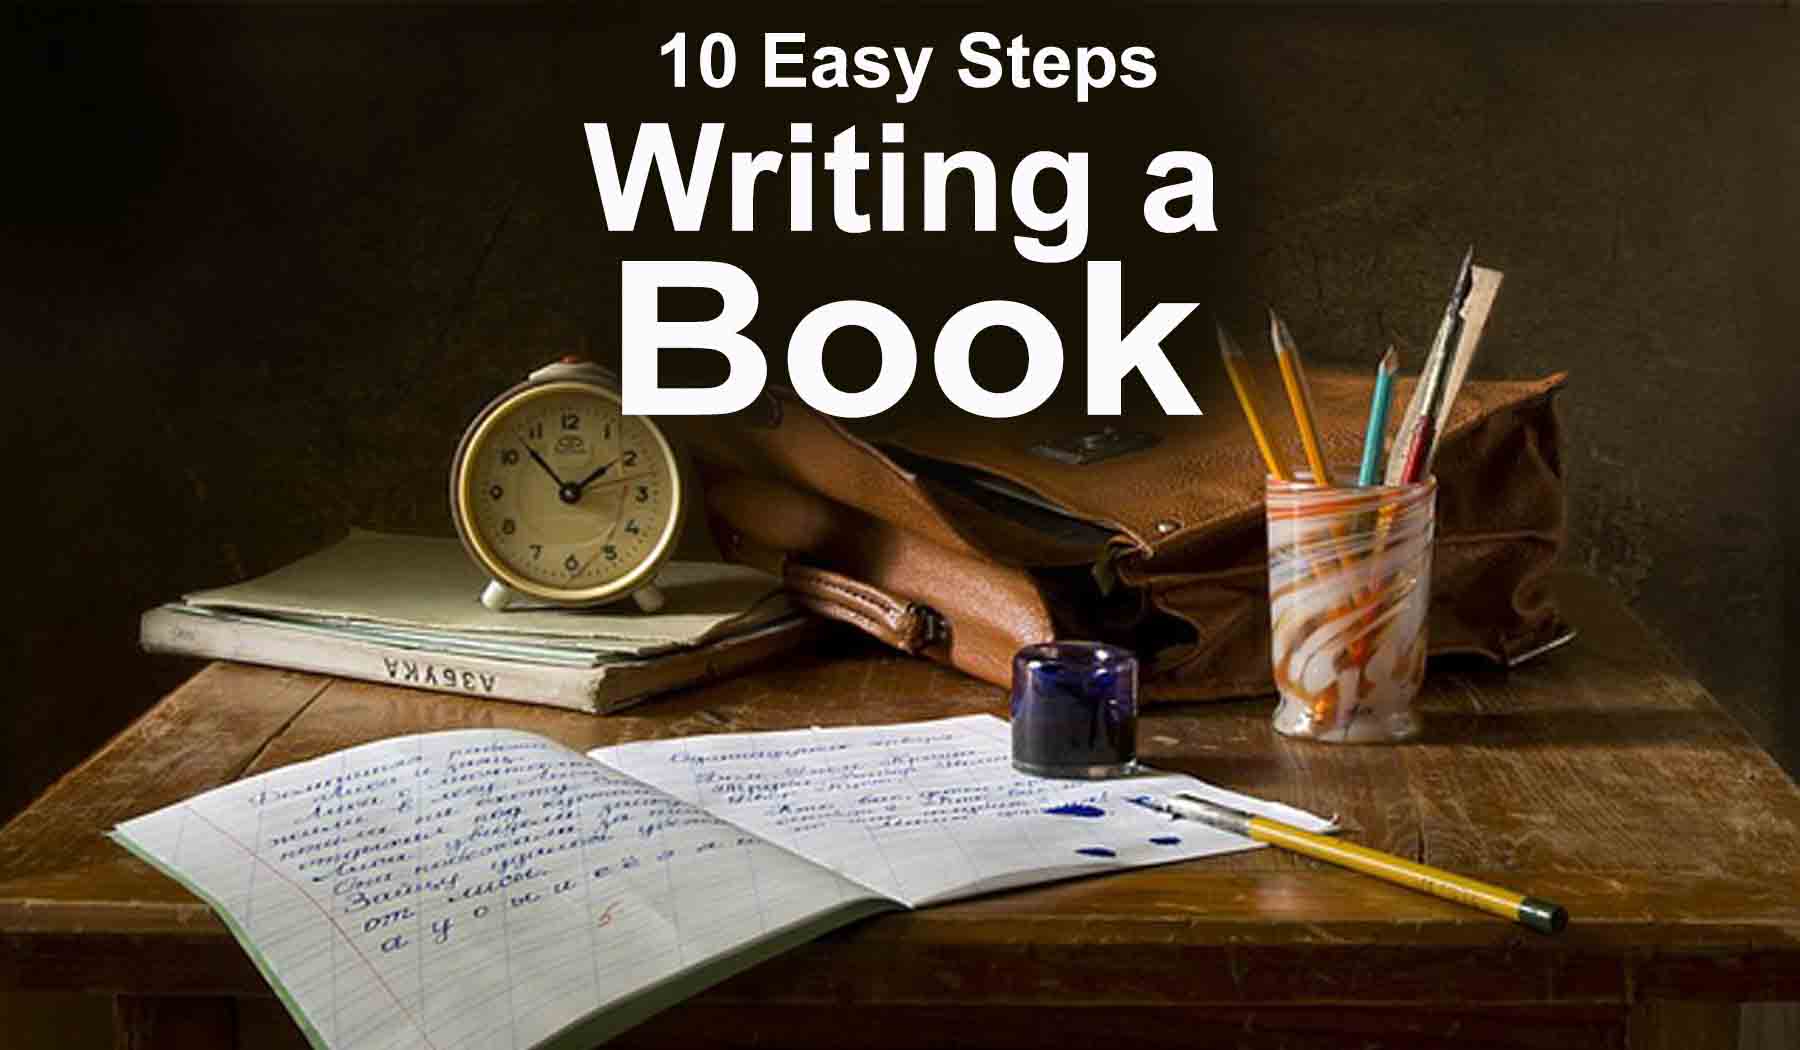 Writing a Book in 10 Easy Steps